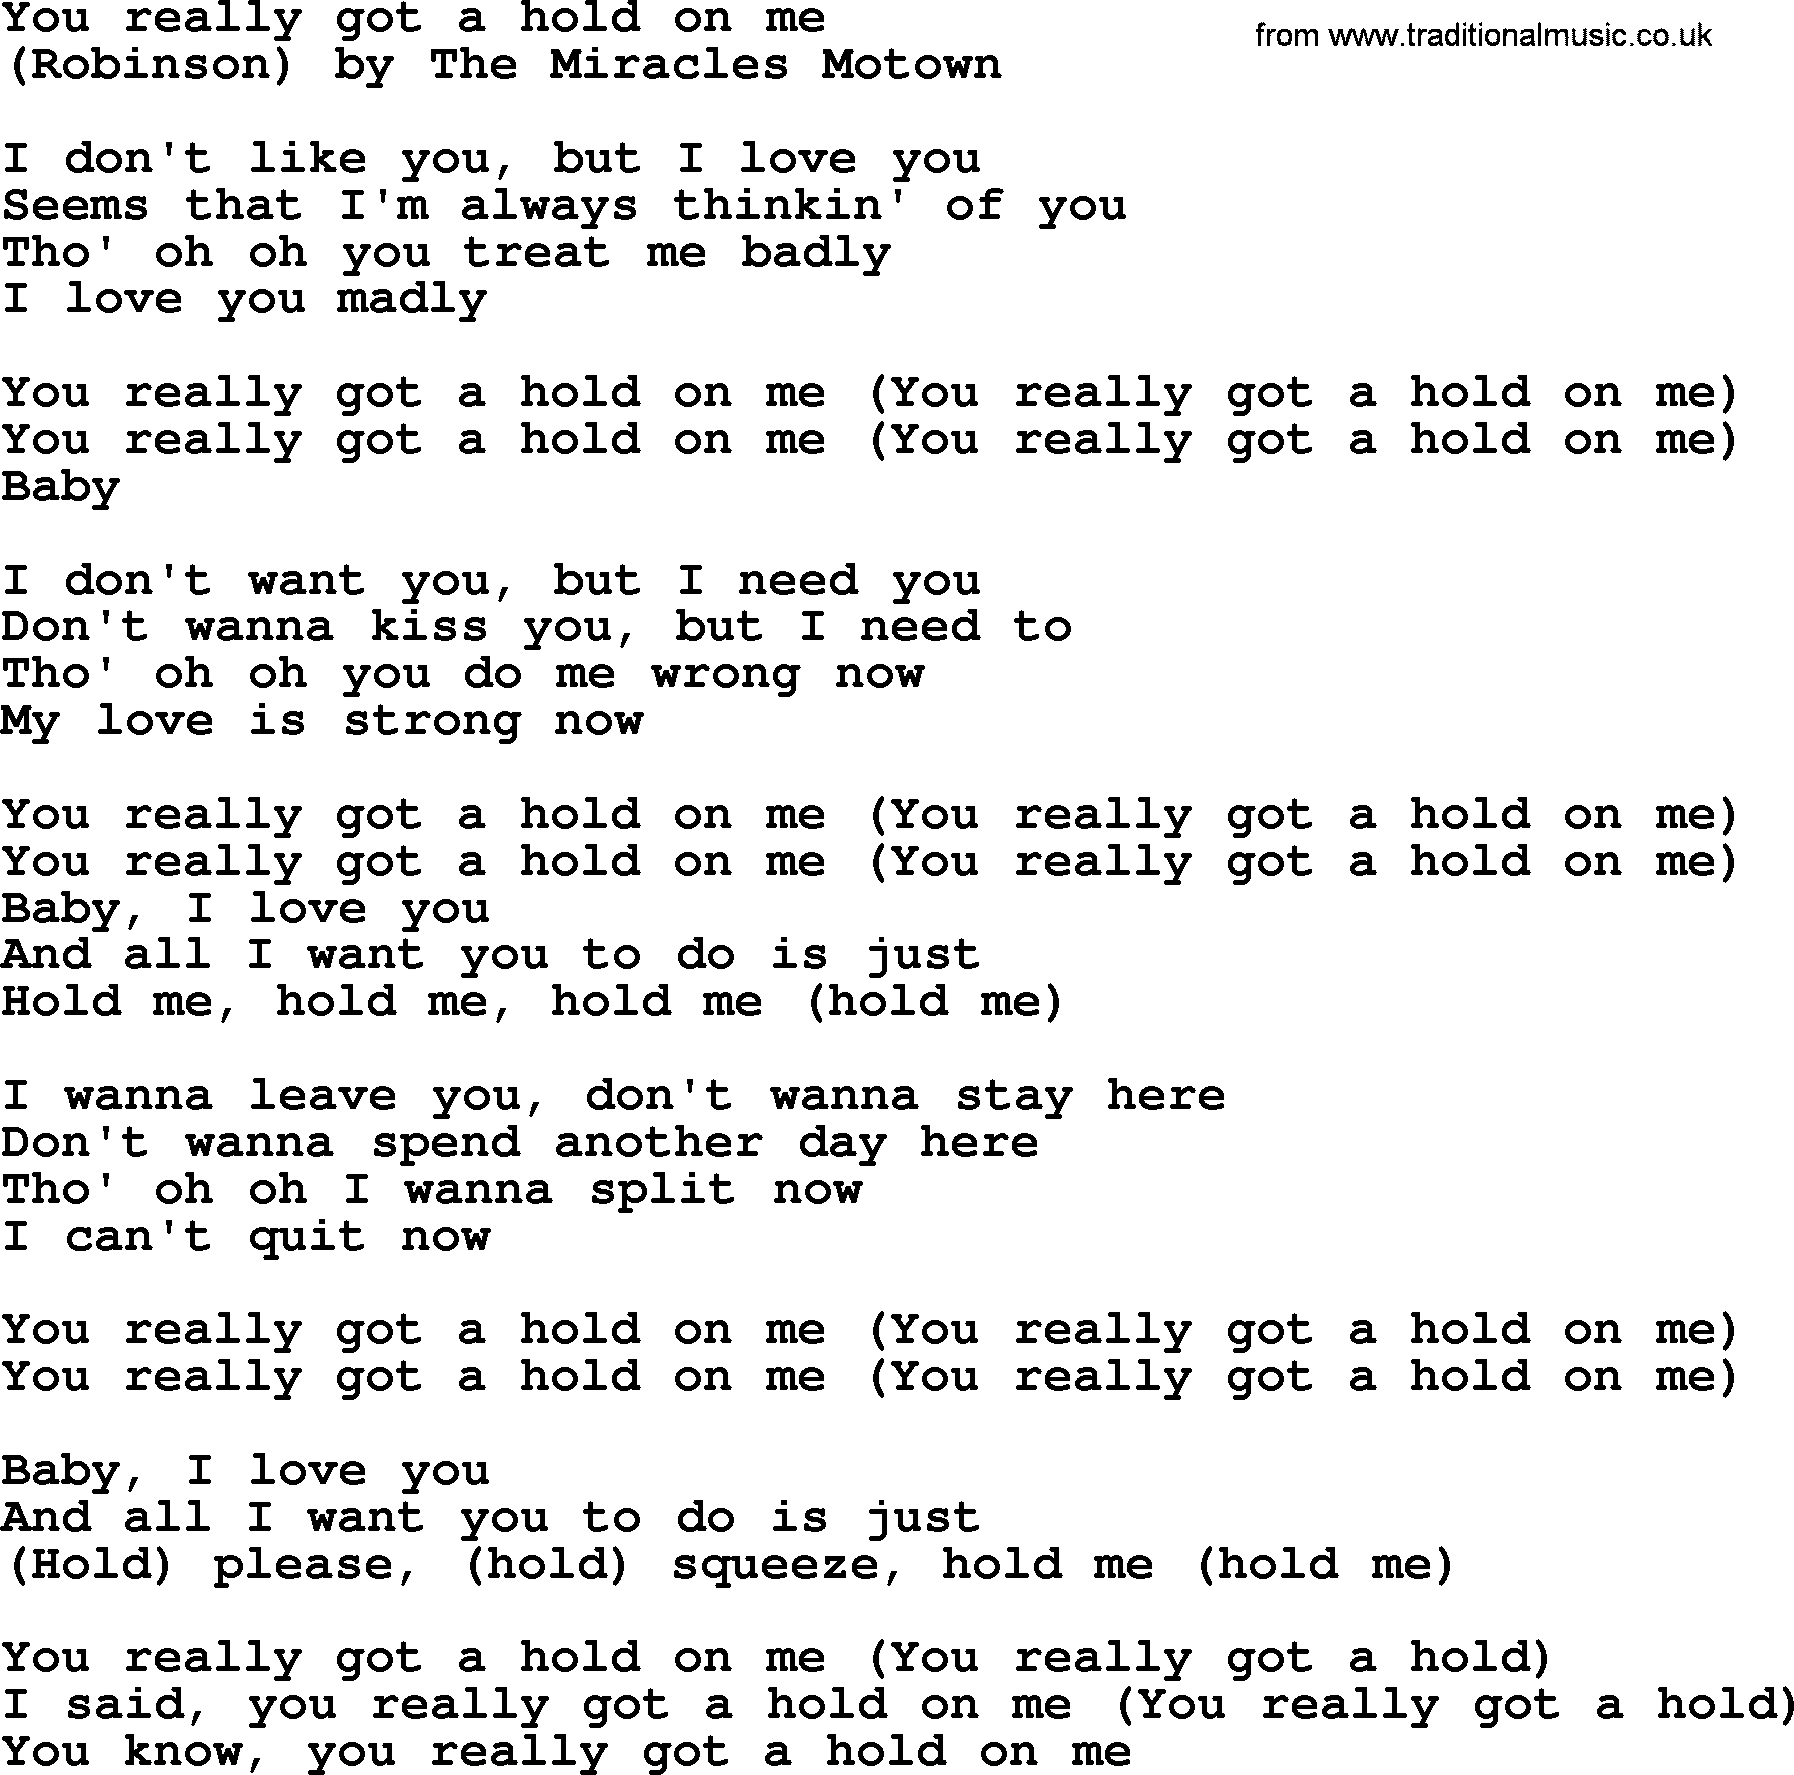 Bruce Springsteen song: You Really Got A Hold On Me lyrics